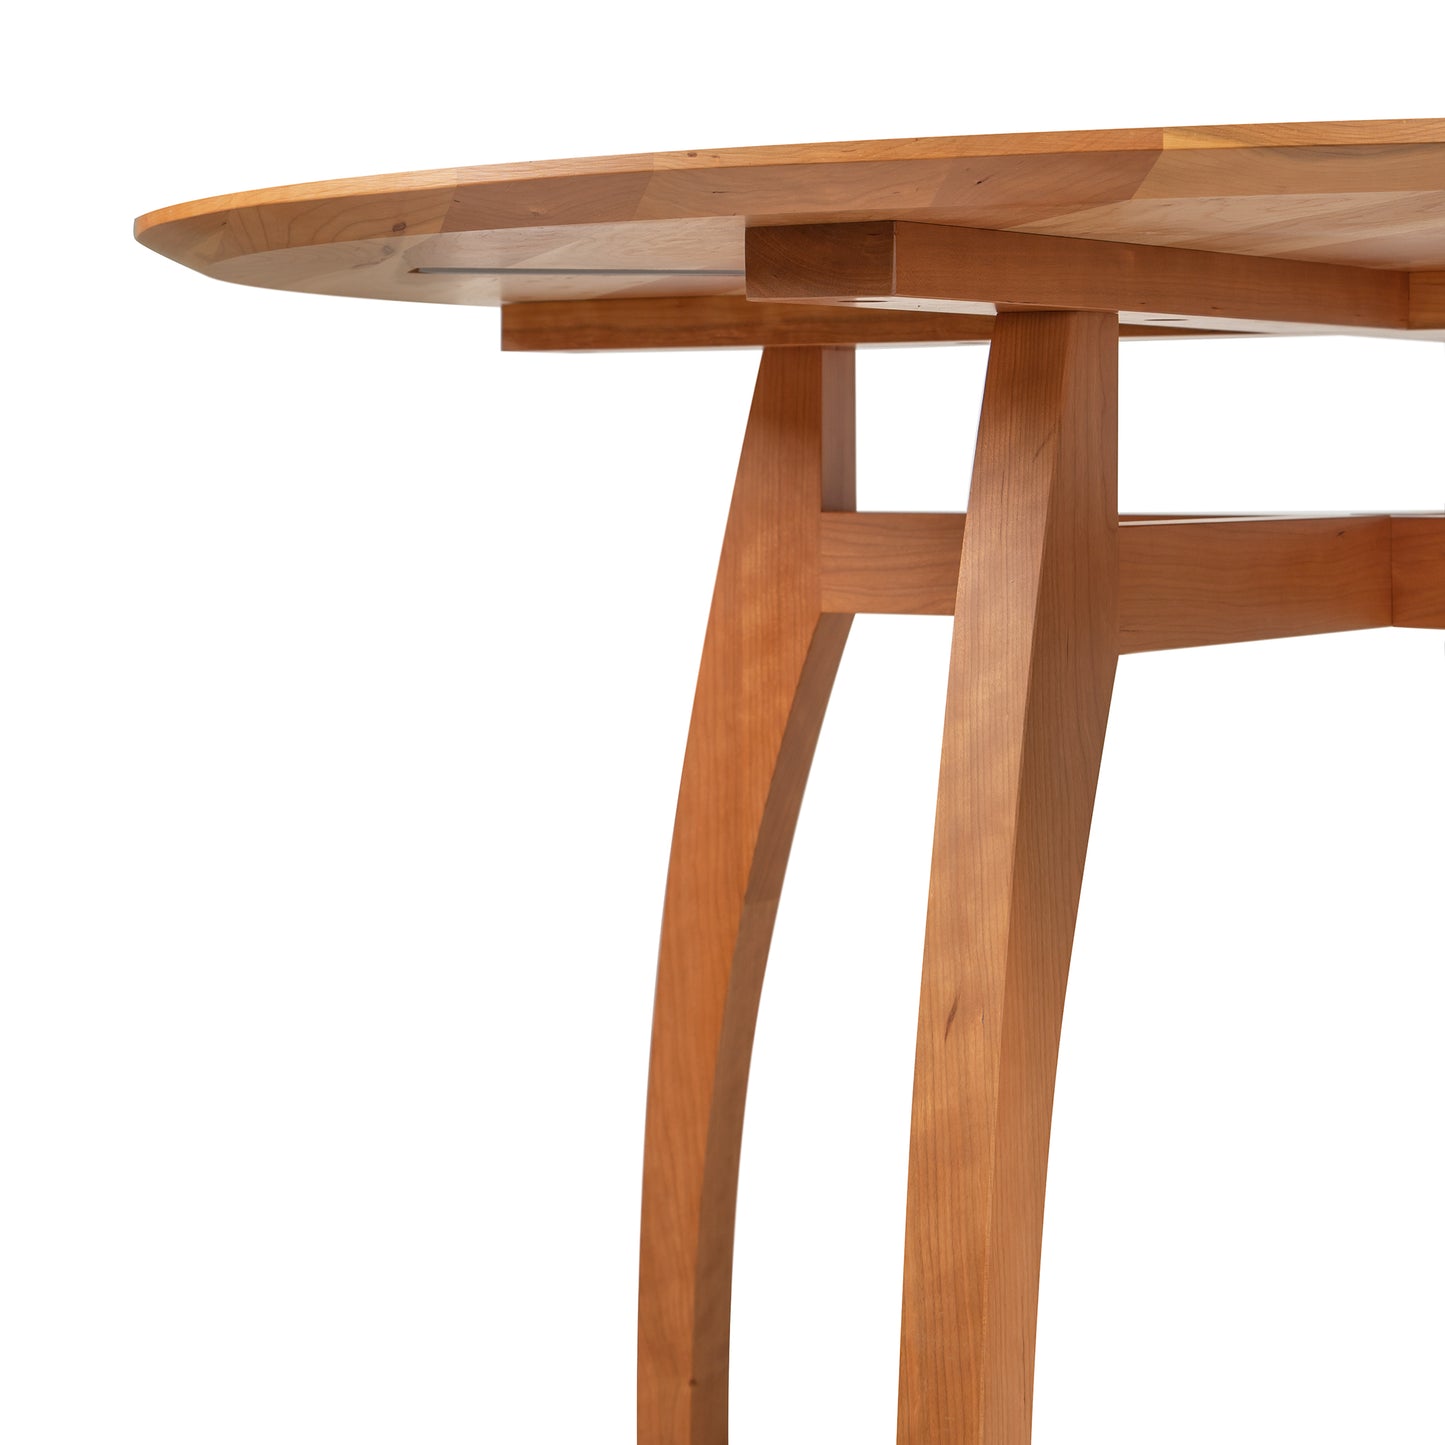 Handmade Lyndon Furniture Vermont Modern Round Solid Top Pedestal Table, crafted from organic wood with a wooden base.